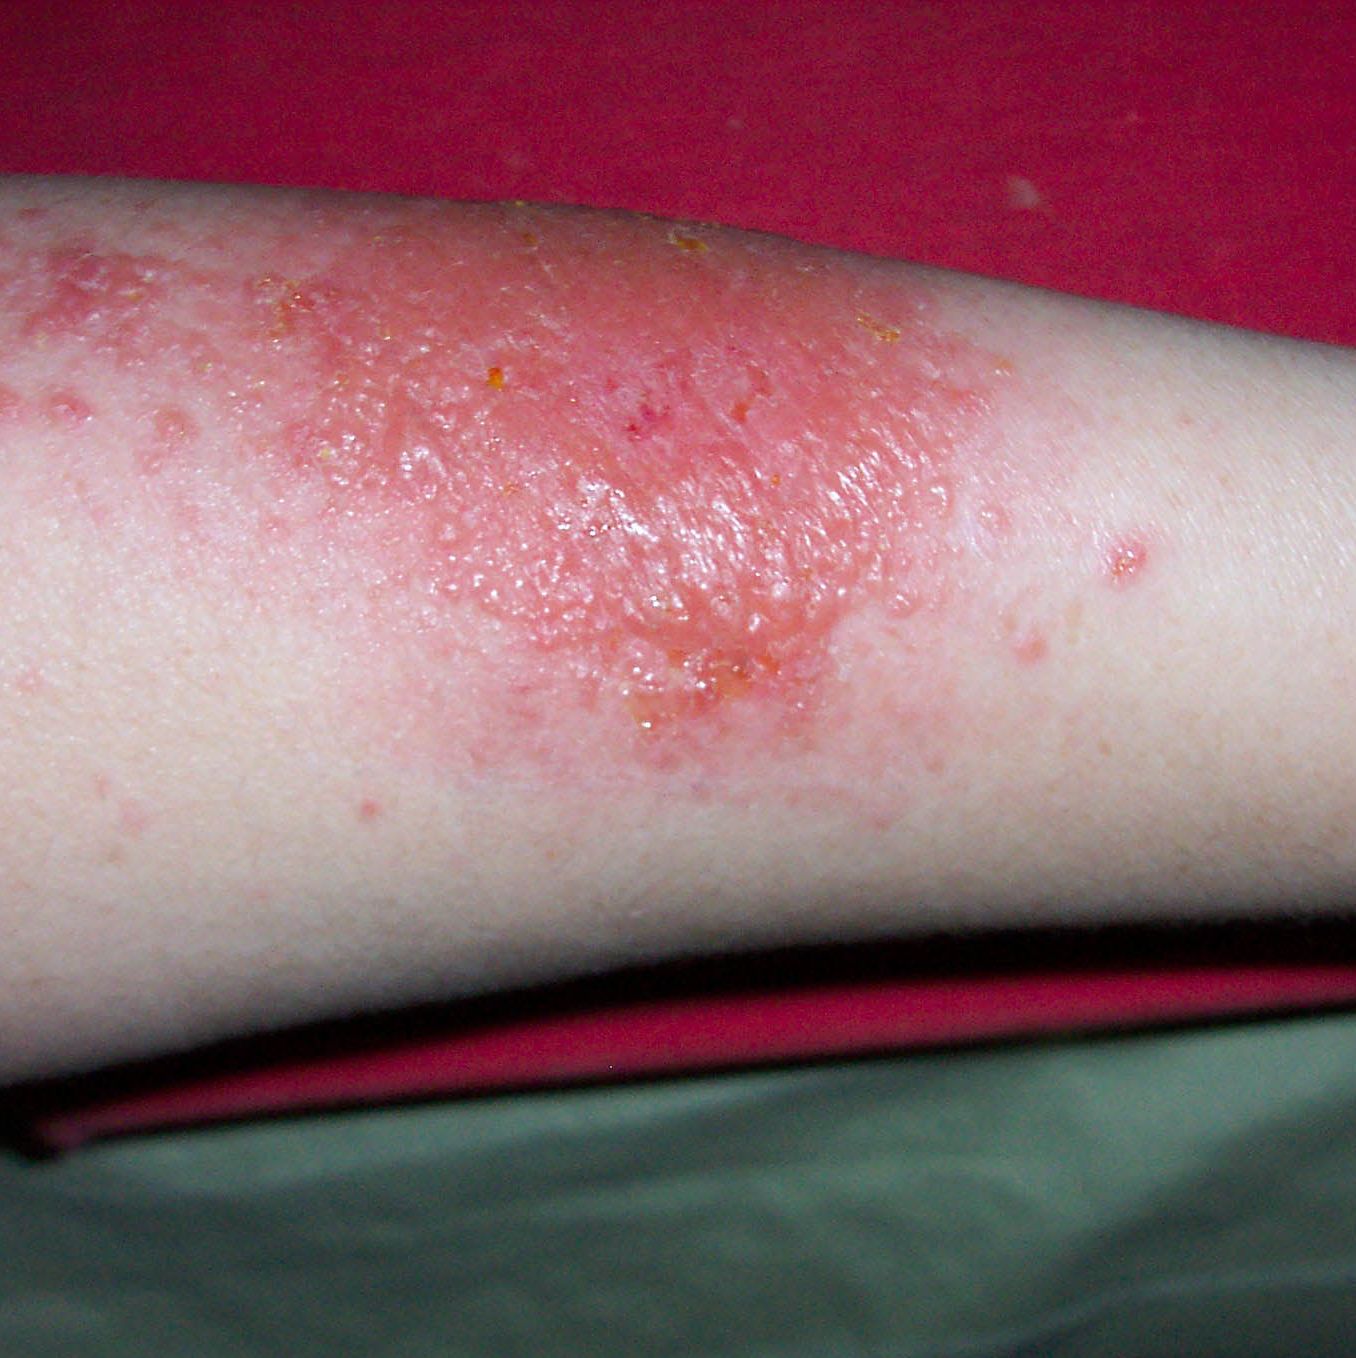 flat red rash on arms